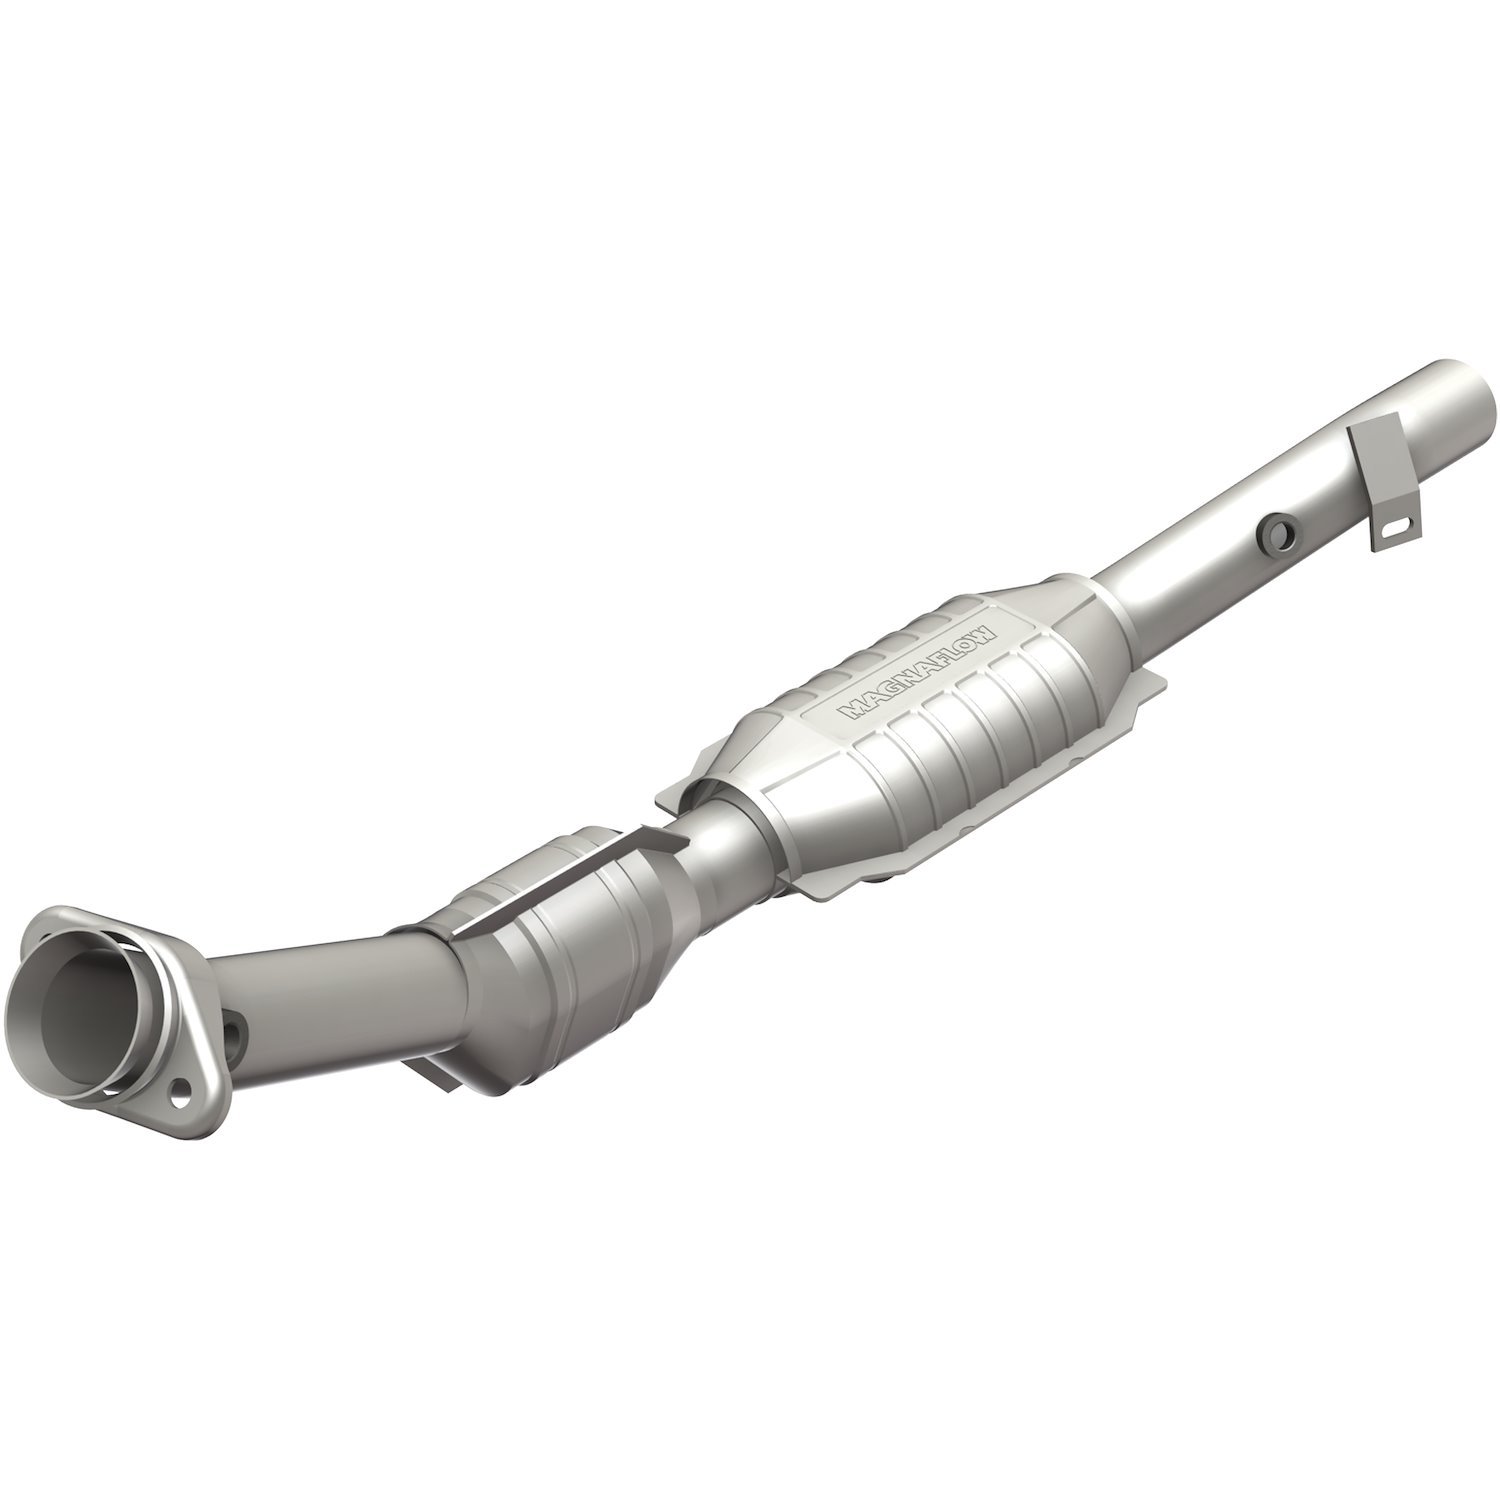 OEM Grade Federal / EPA Compliant Direct-Fit Catalytic Converter 51727